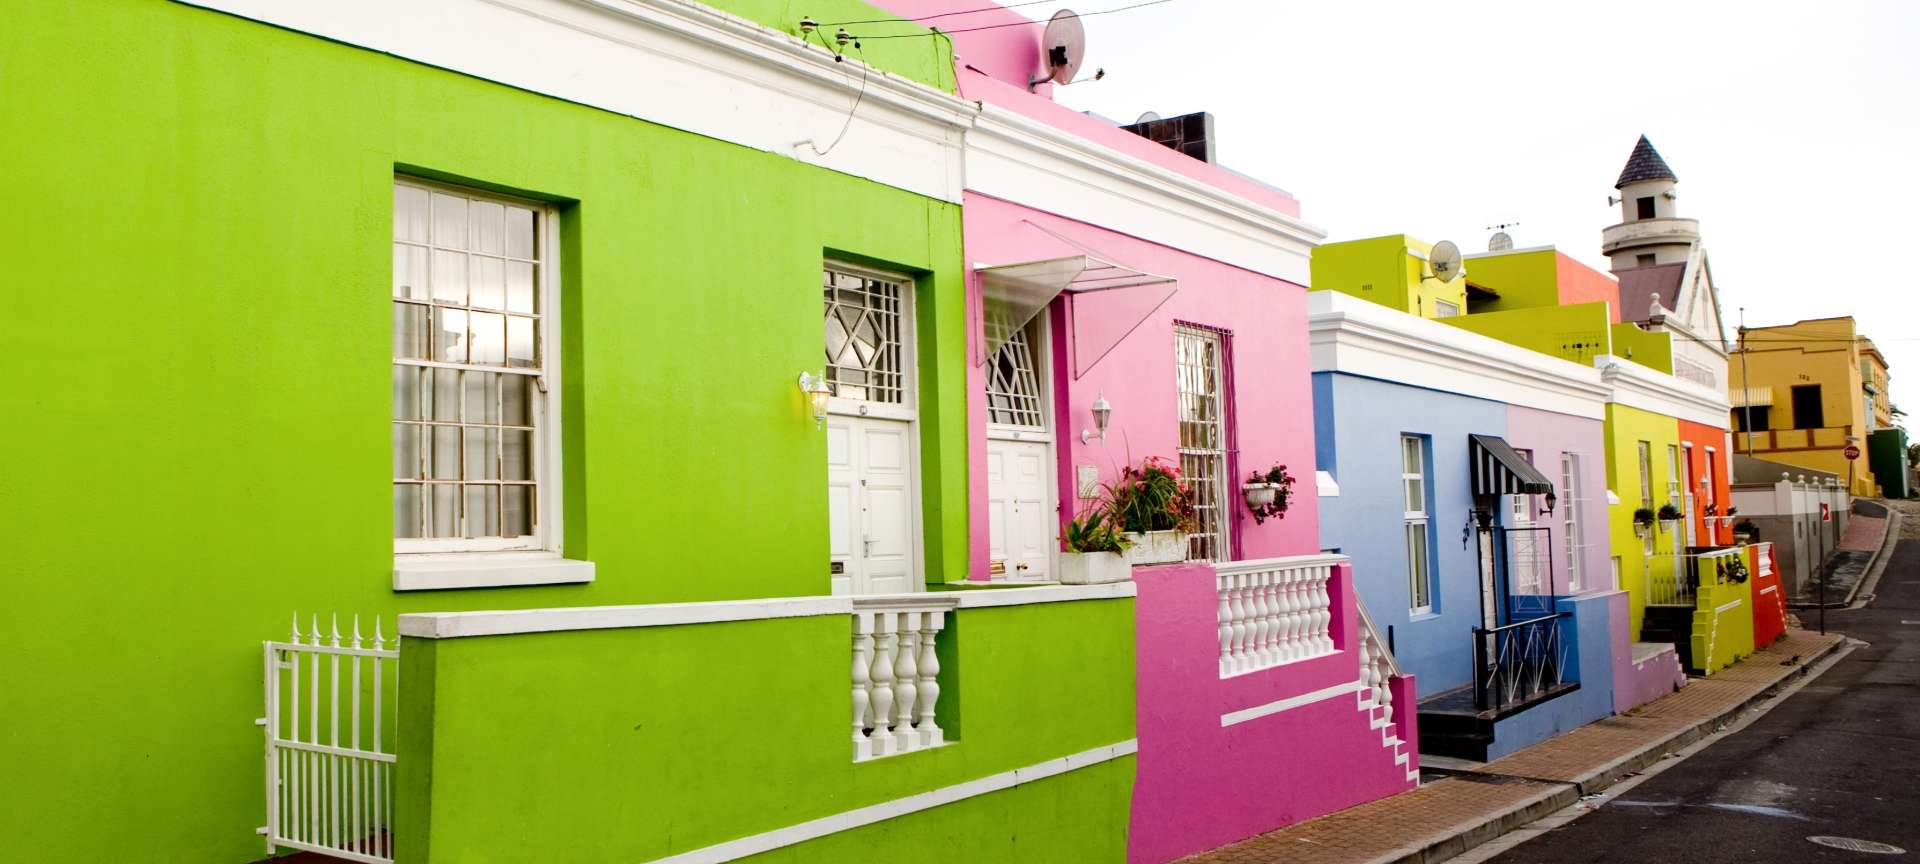 The cobbled streets and colourful houses of Bo-Kaap are a popular photographic destination.